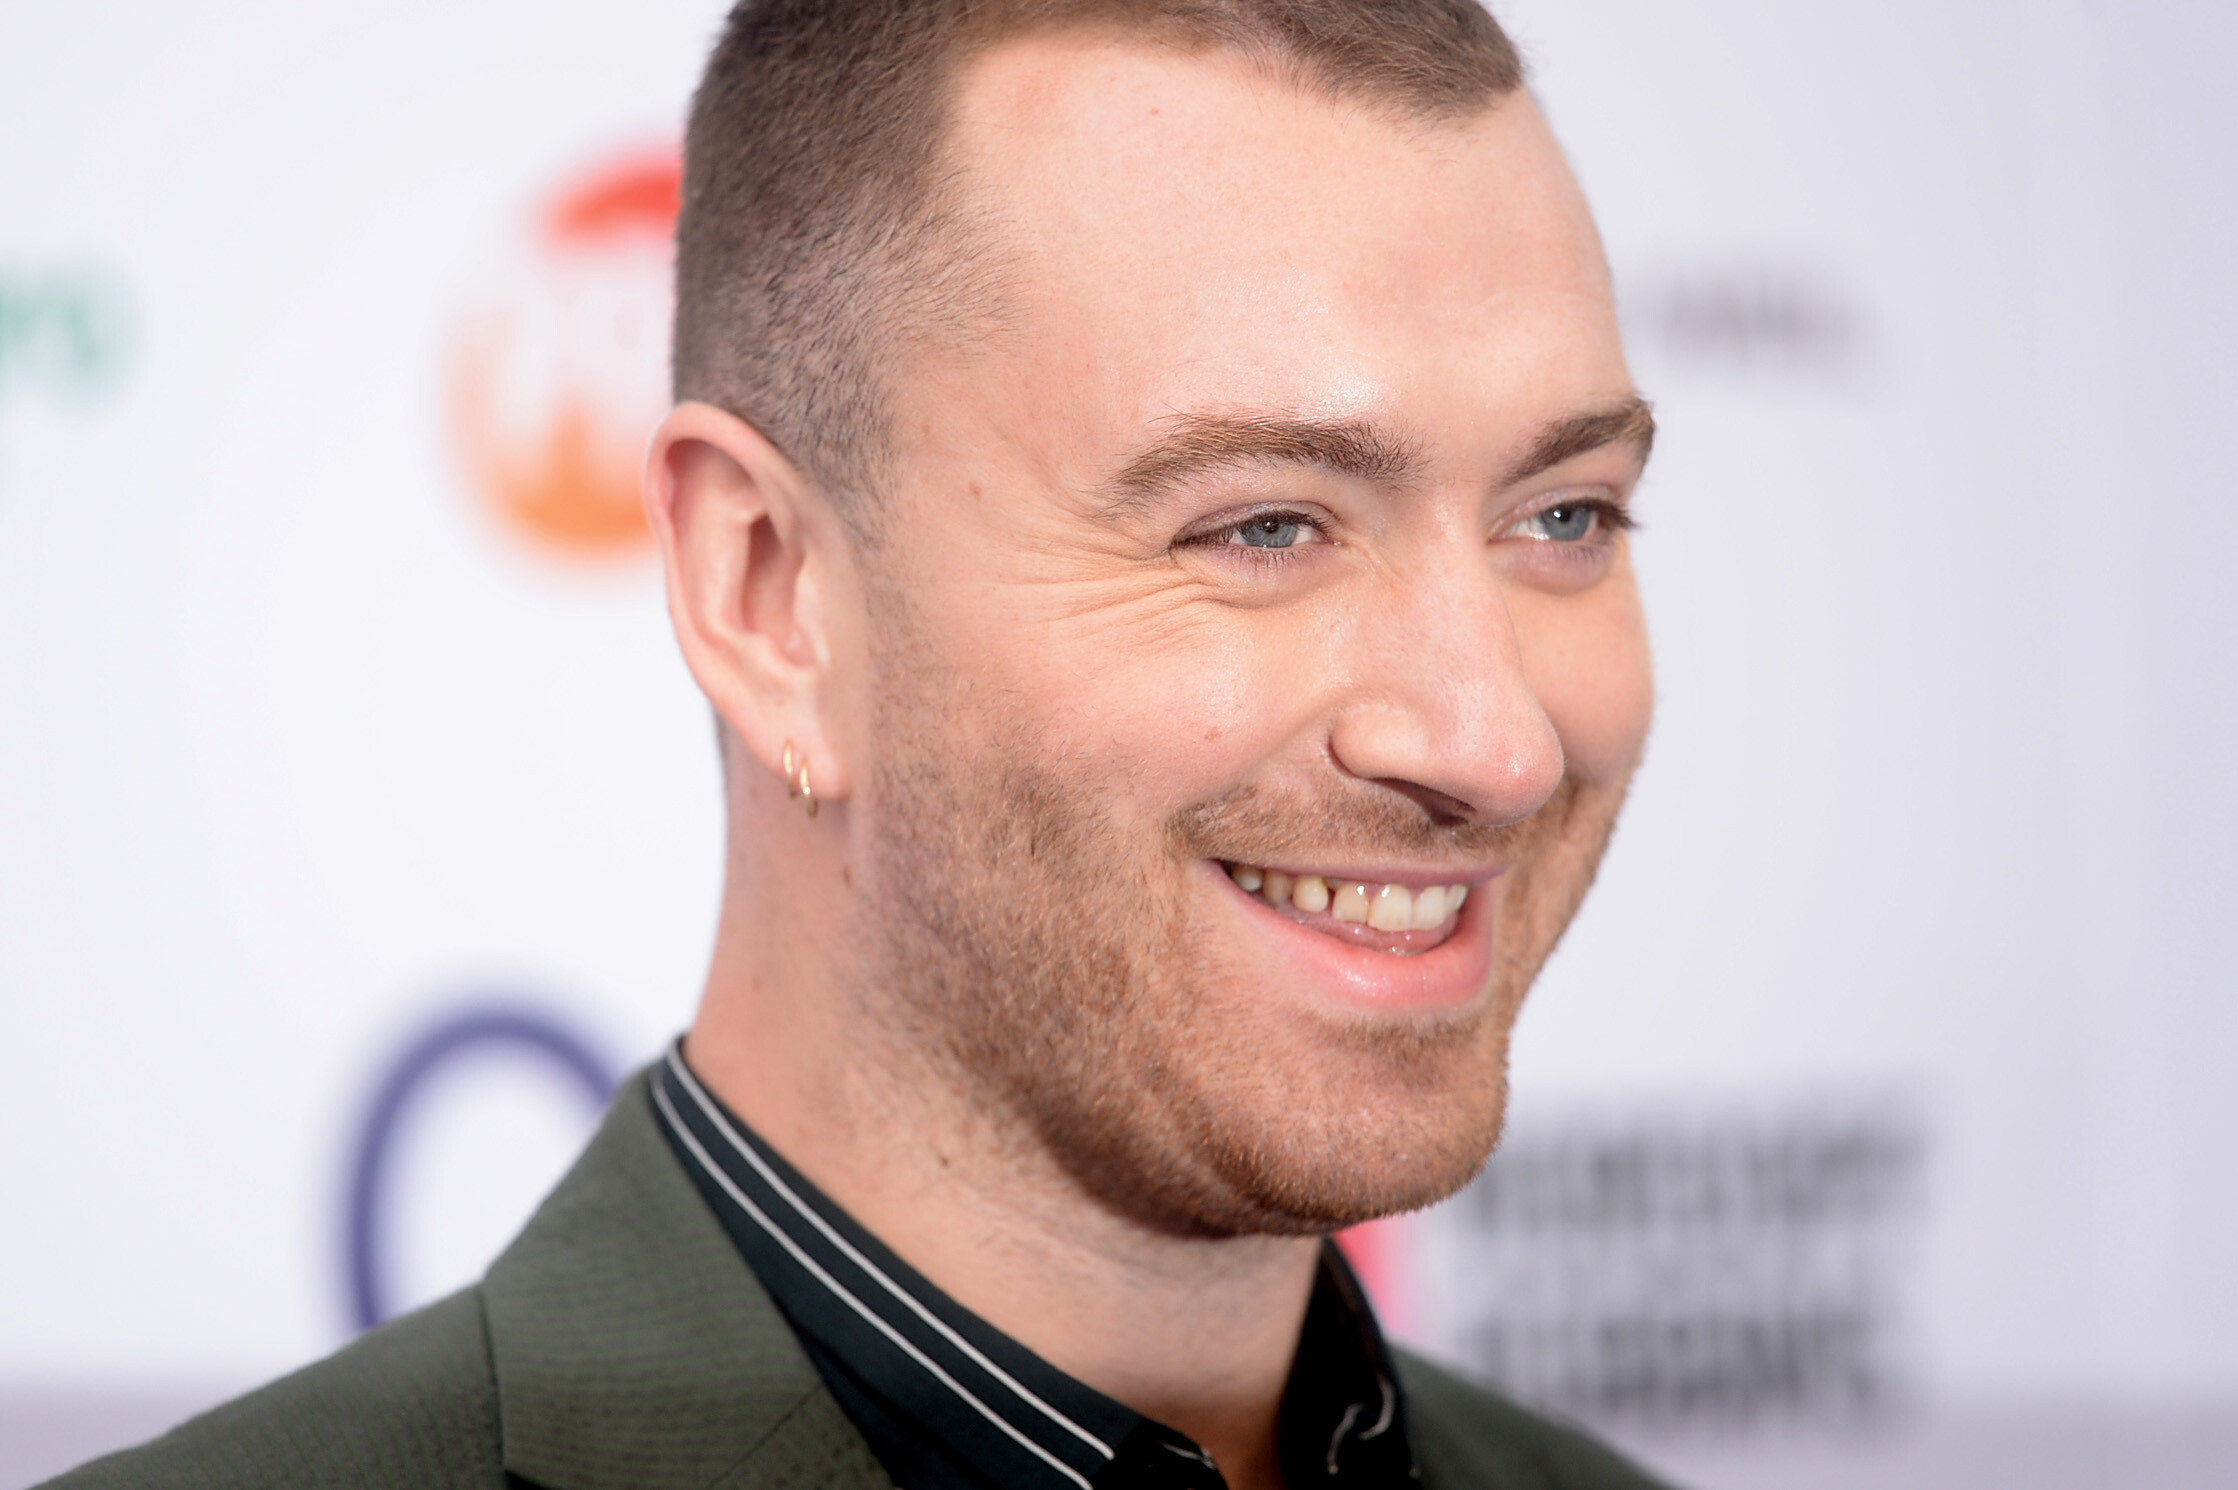 Sam Smith: "Stay with Me" won Song of the Year award at the 57th Annual Grammy Awards. 2240x1490 HD Wallpaper.